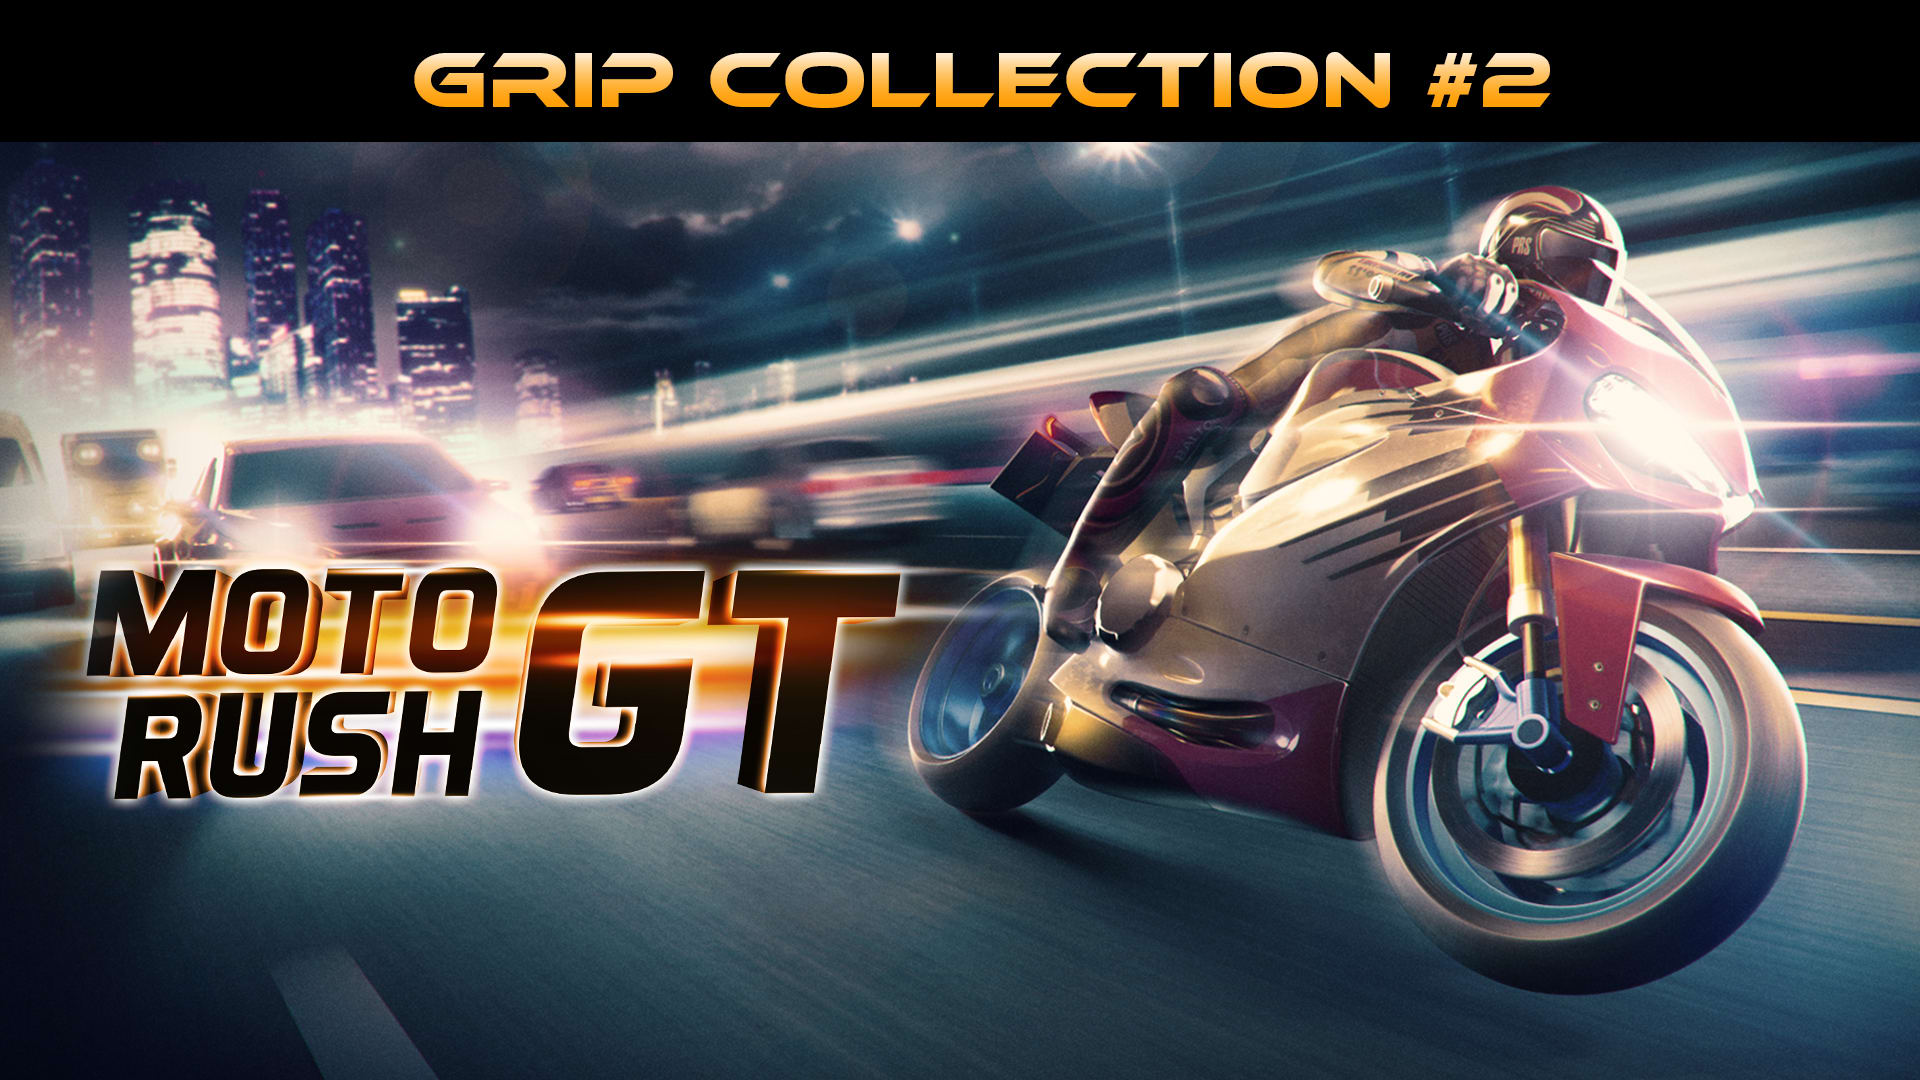 Moto Rush GT Grip Collection #2